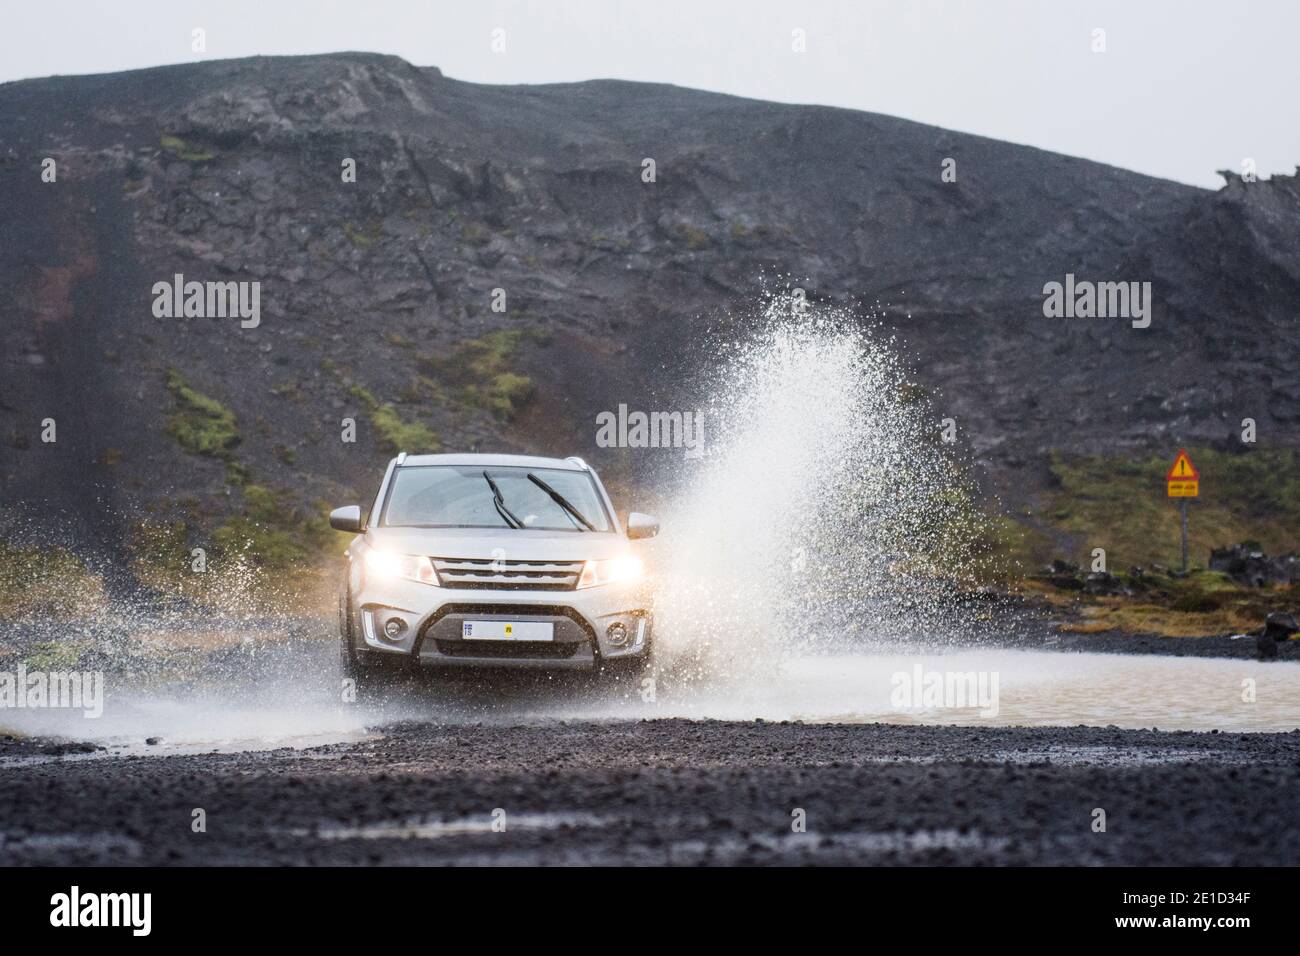 A silver coloured SUV races across a pond on a four wheel drive black road, spraying water up to twice its height, in South Iceland. Stock Photo